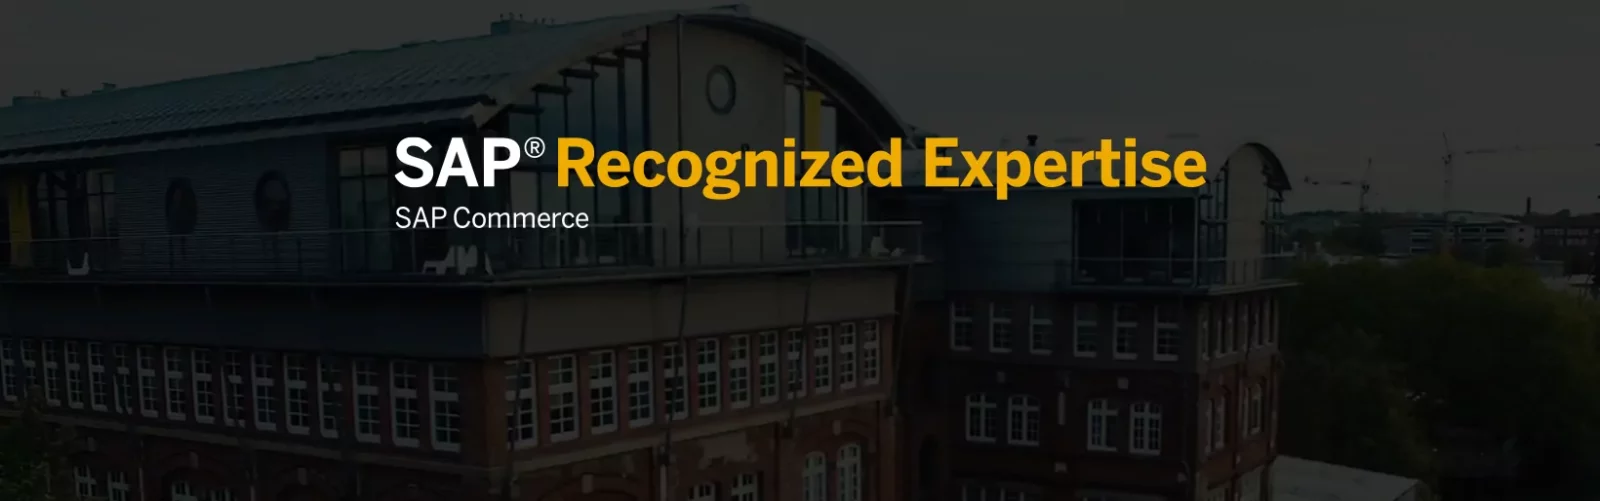 „Recognized Expertise in SAP Commerce“